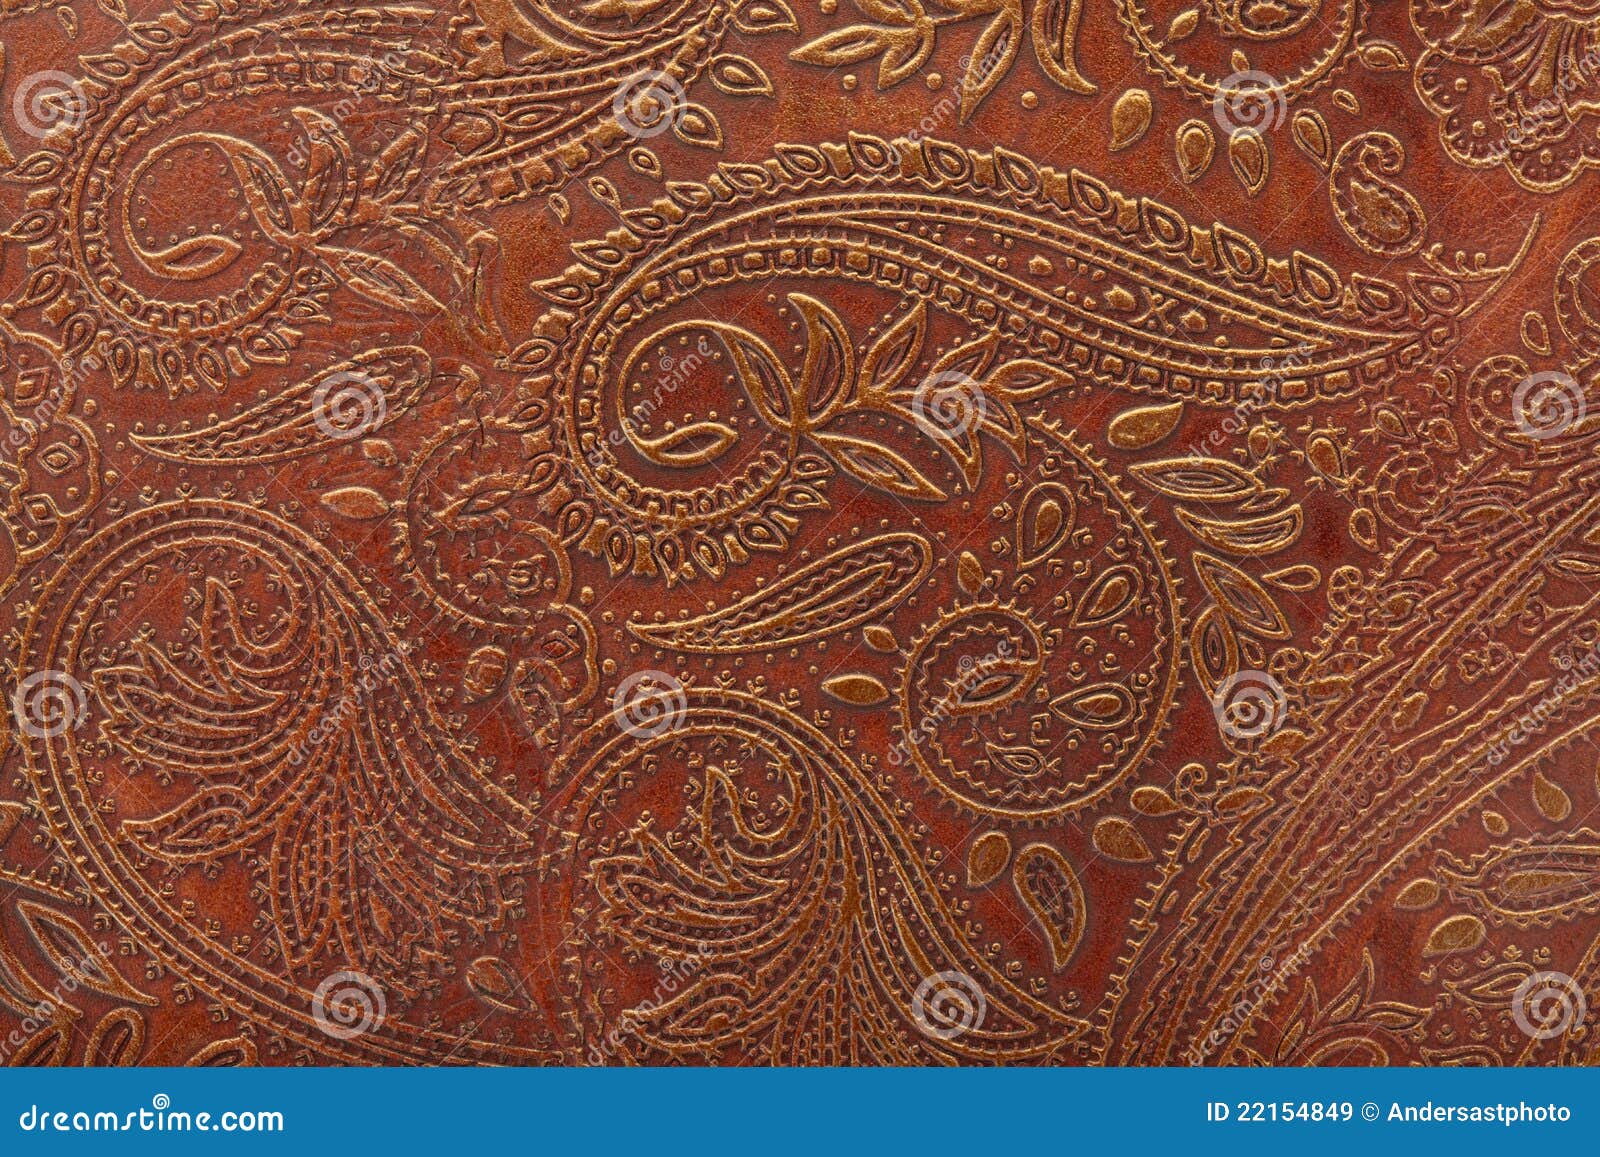 floral pattern in brown leather